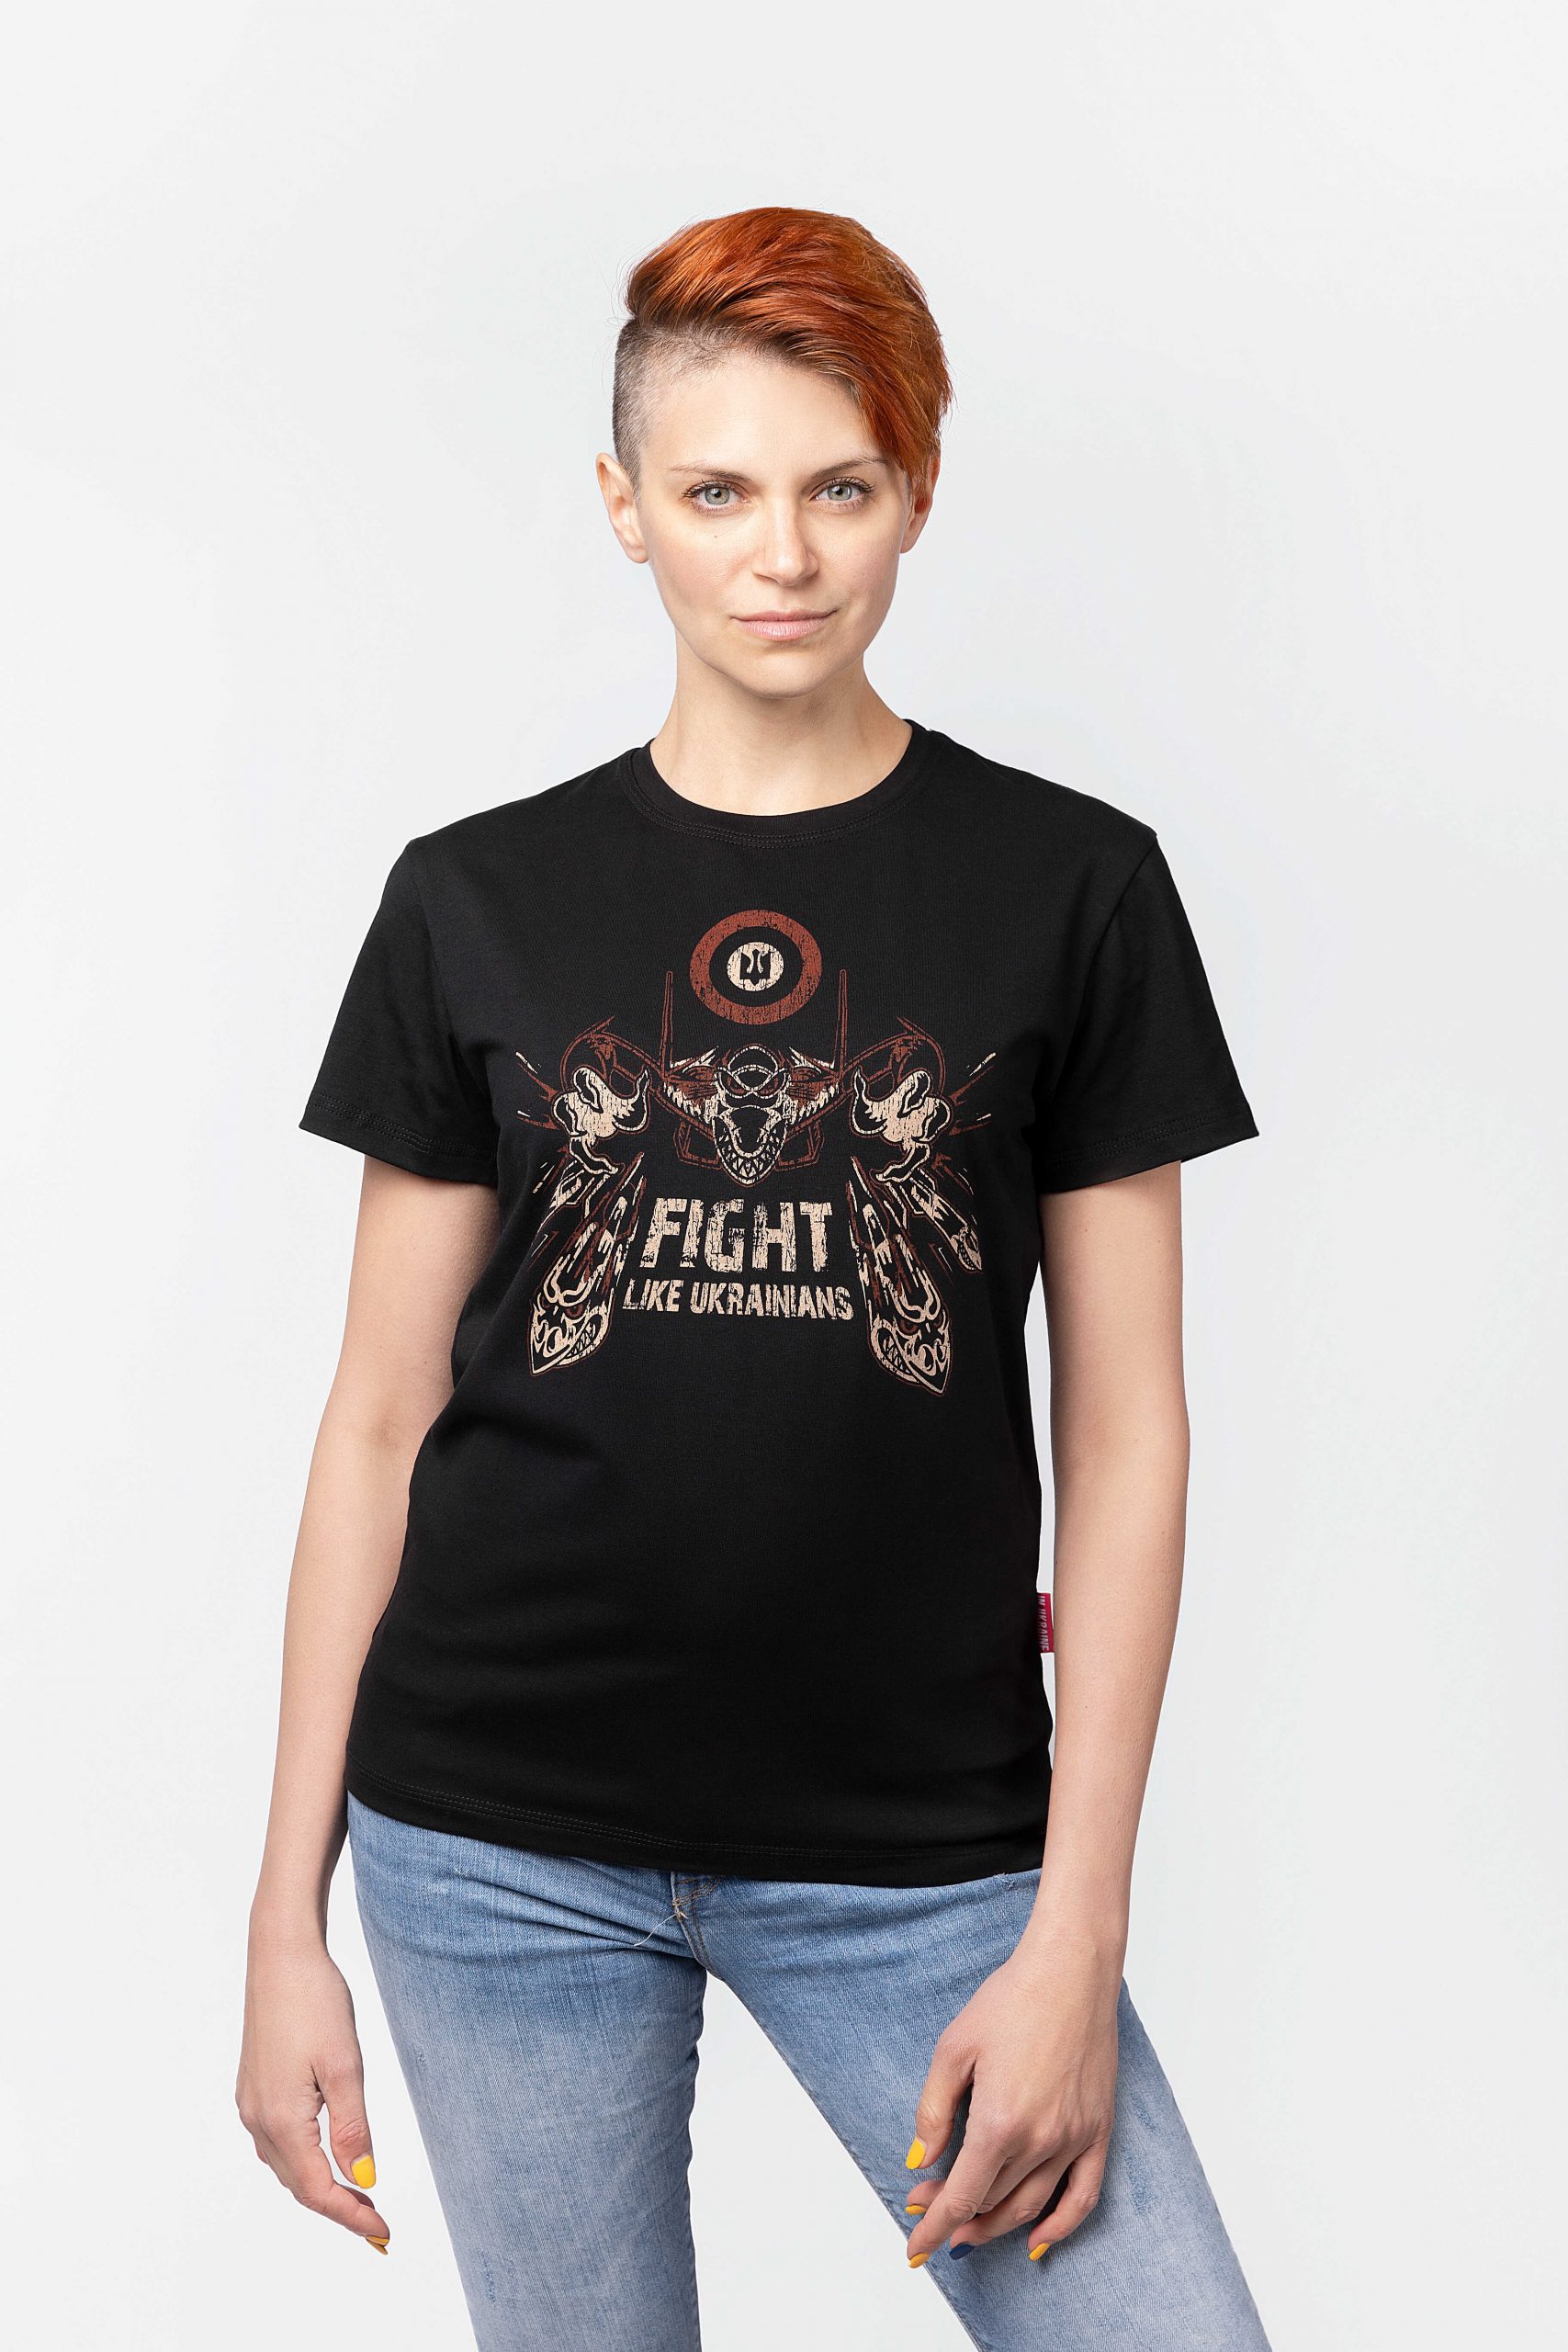 Women's T-Shirt Flu. Color black. All income is directed to support 